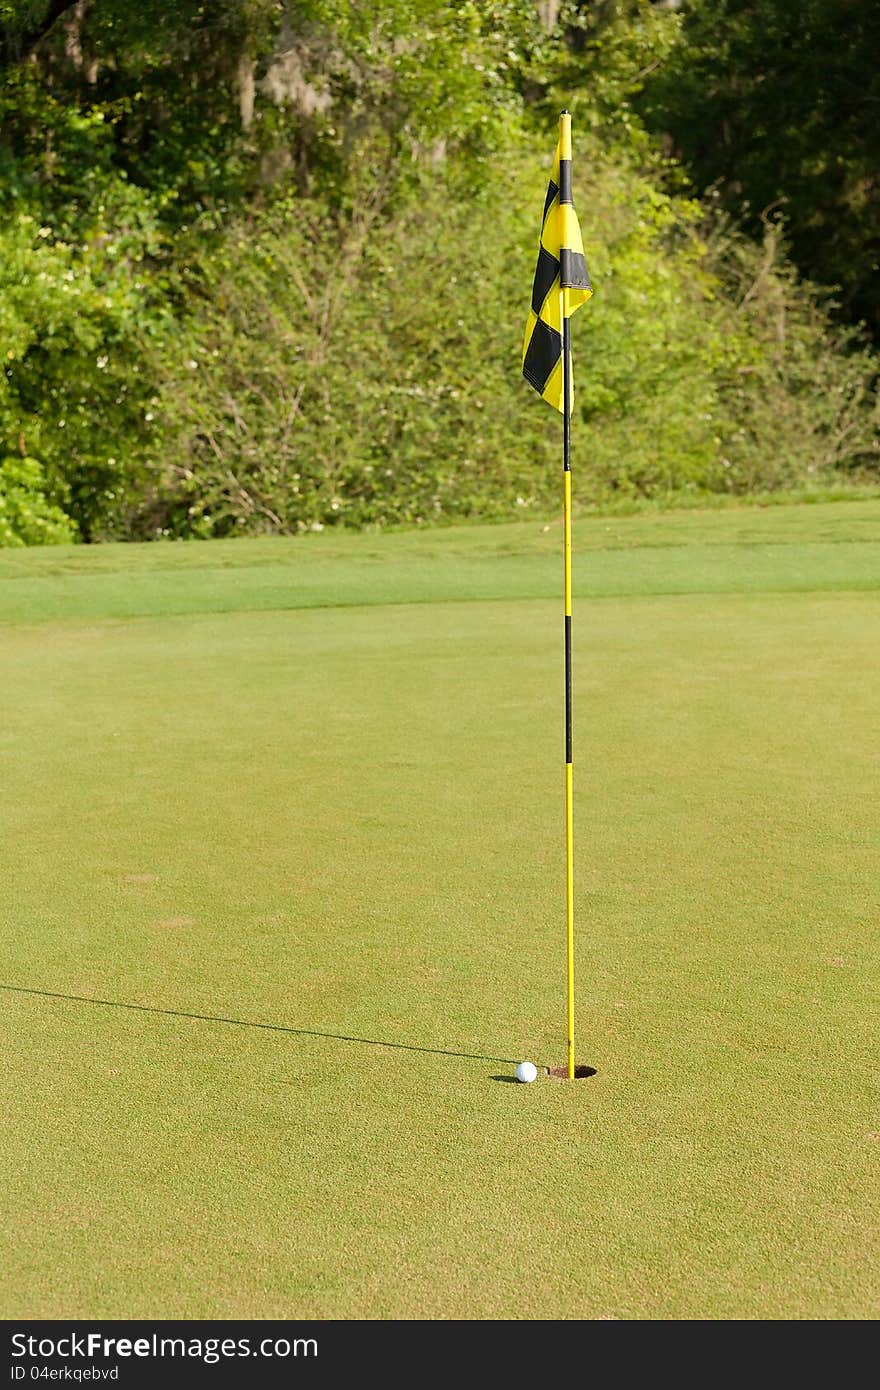 Golf ball sits inches from dropping in the hole on the putting green. Golf ball sits inches from dropping in the hole on the putting green